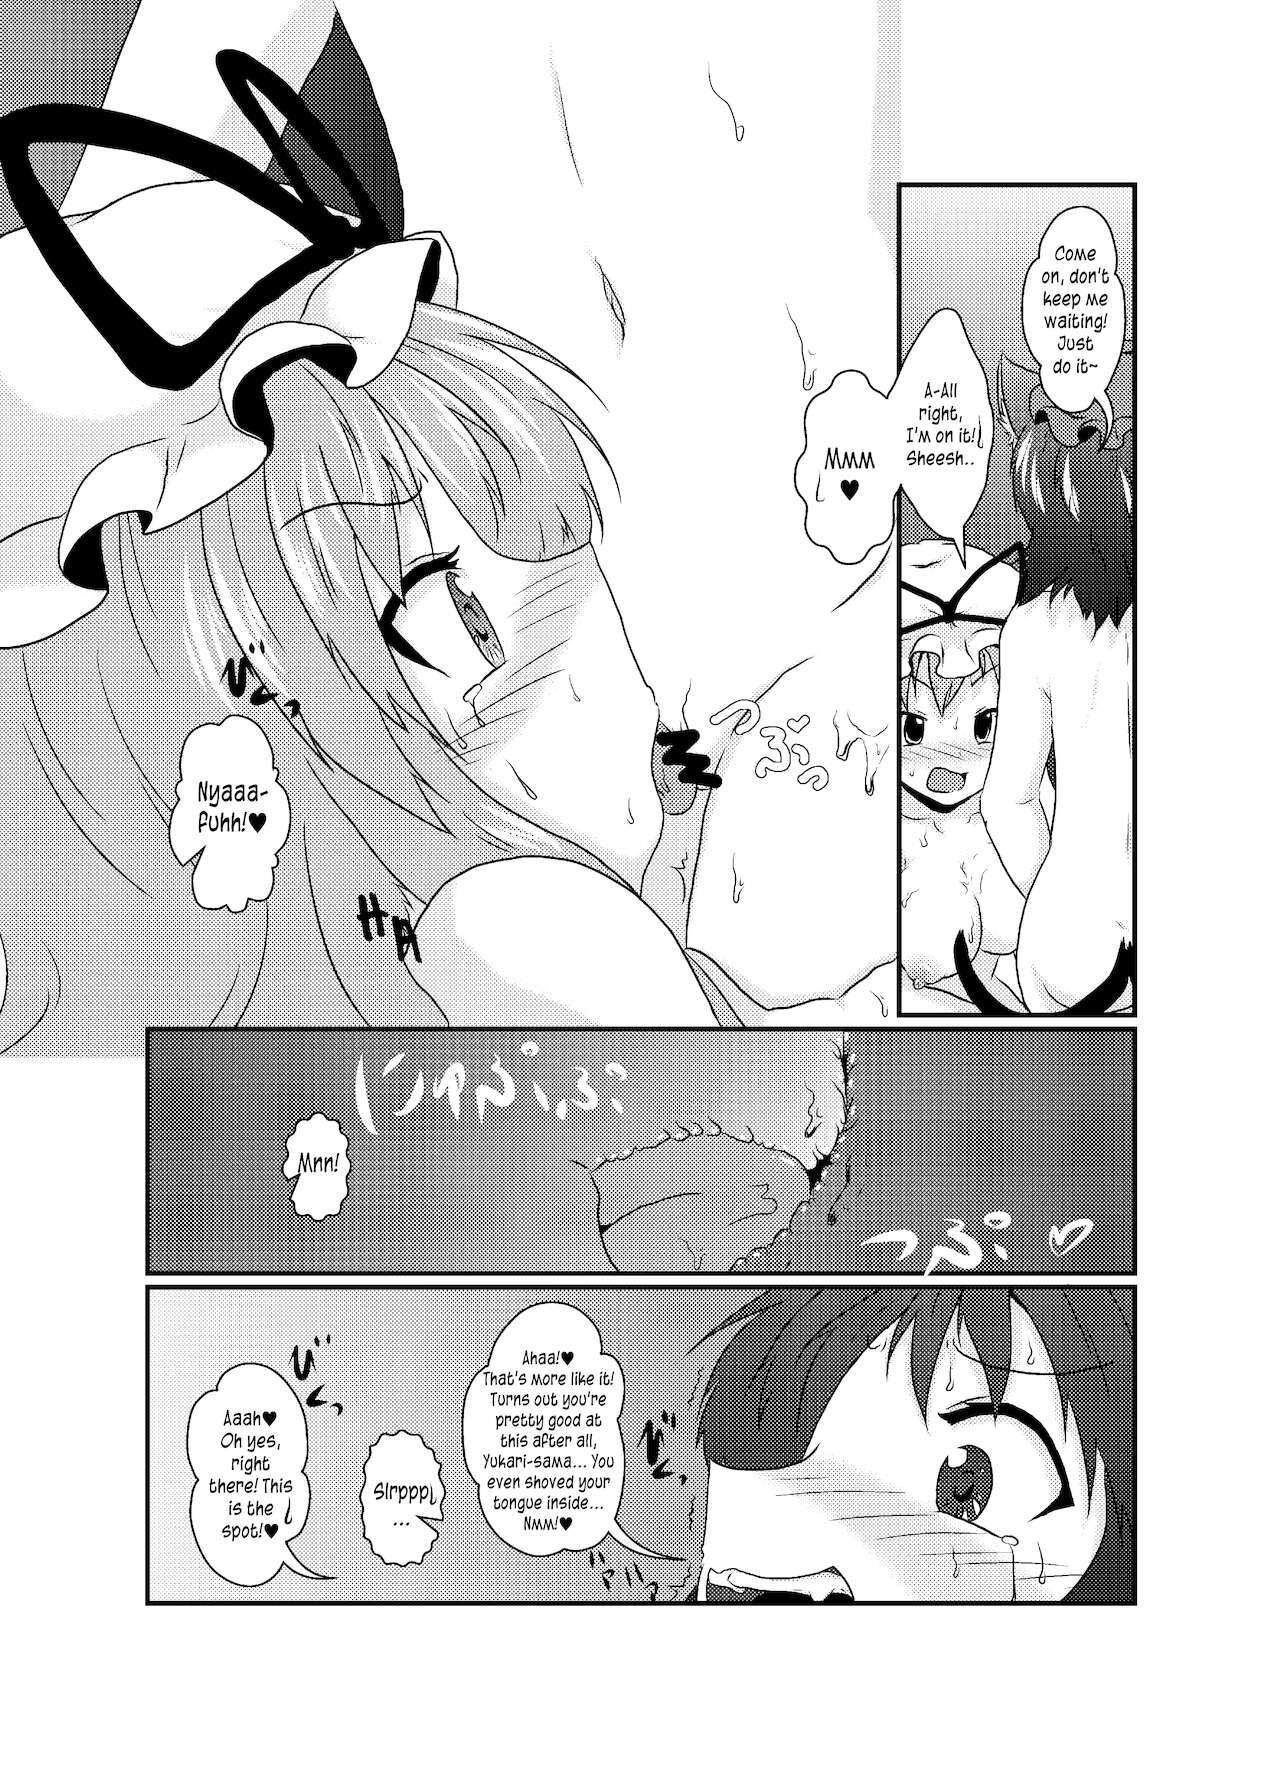 Suck Cock Chotto Tsukarechatta Mitai | I think I'm a little possessed! - Touhou project Tinytits - Page 7